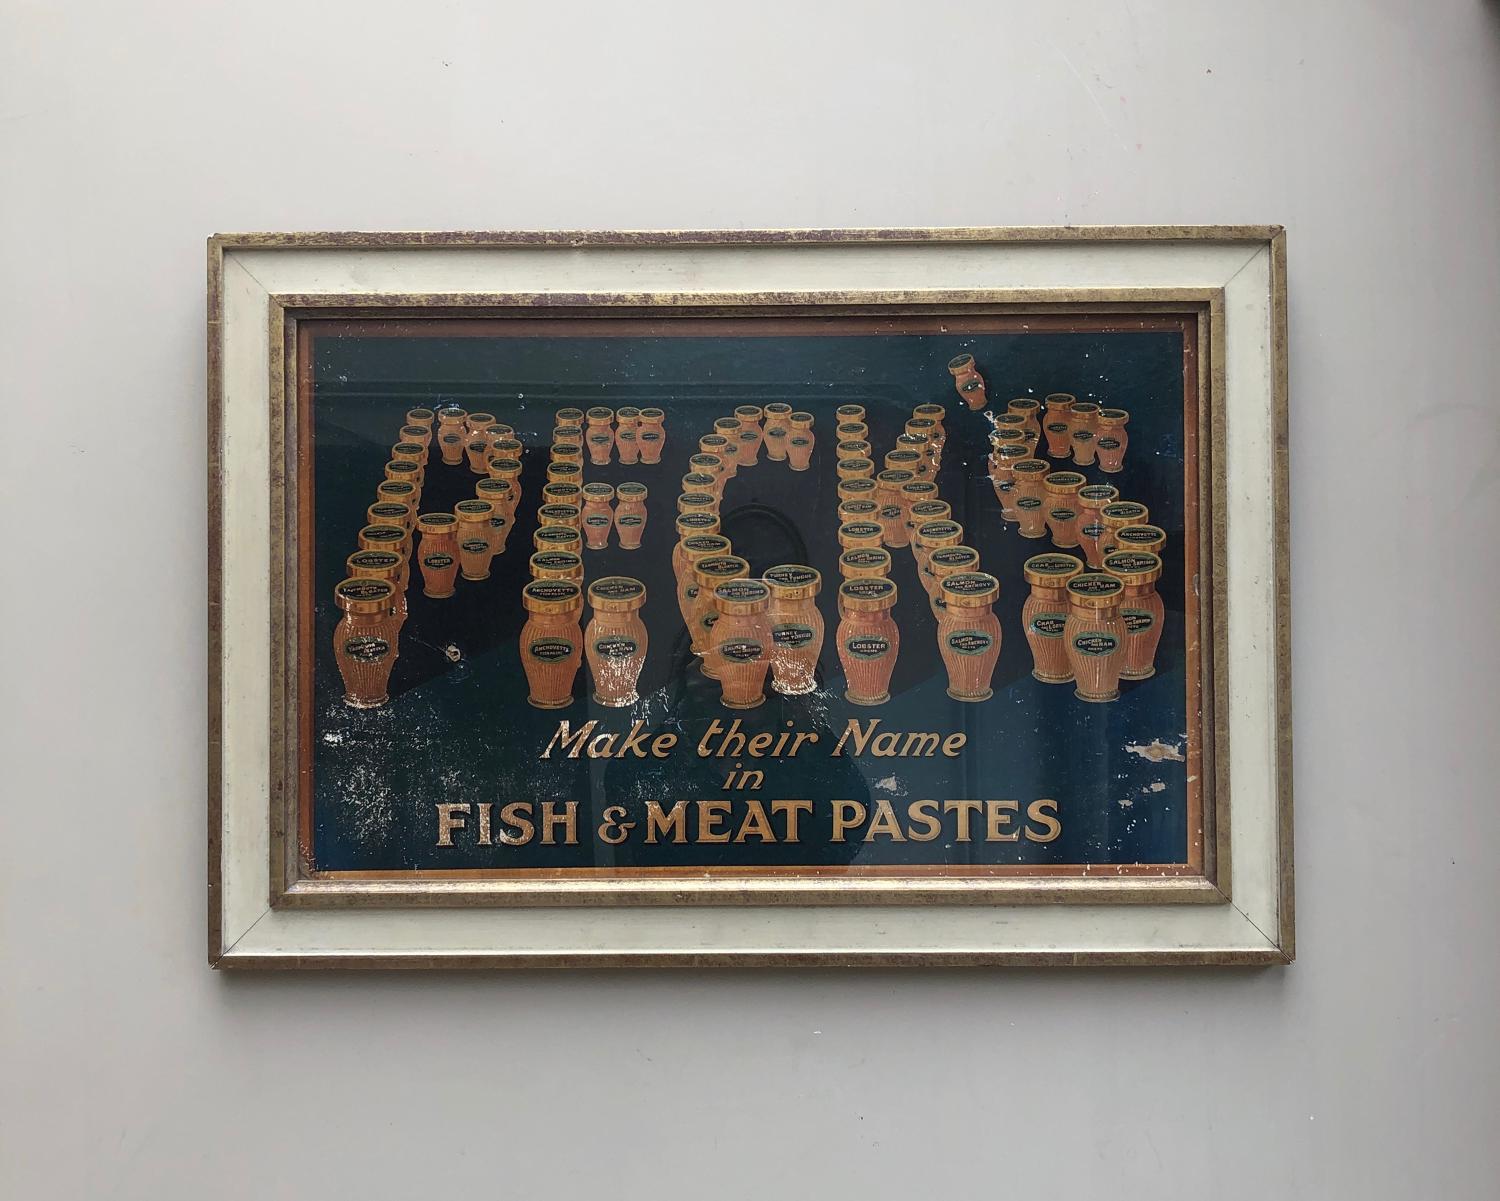 1930s Advertising Show Card in Later Frame - Pecks Fish & Meat Paste